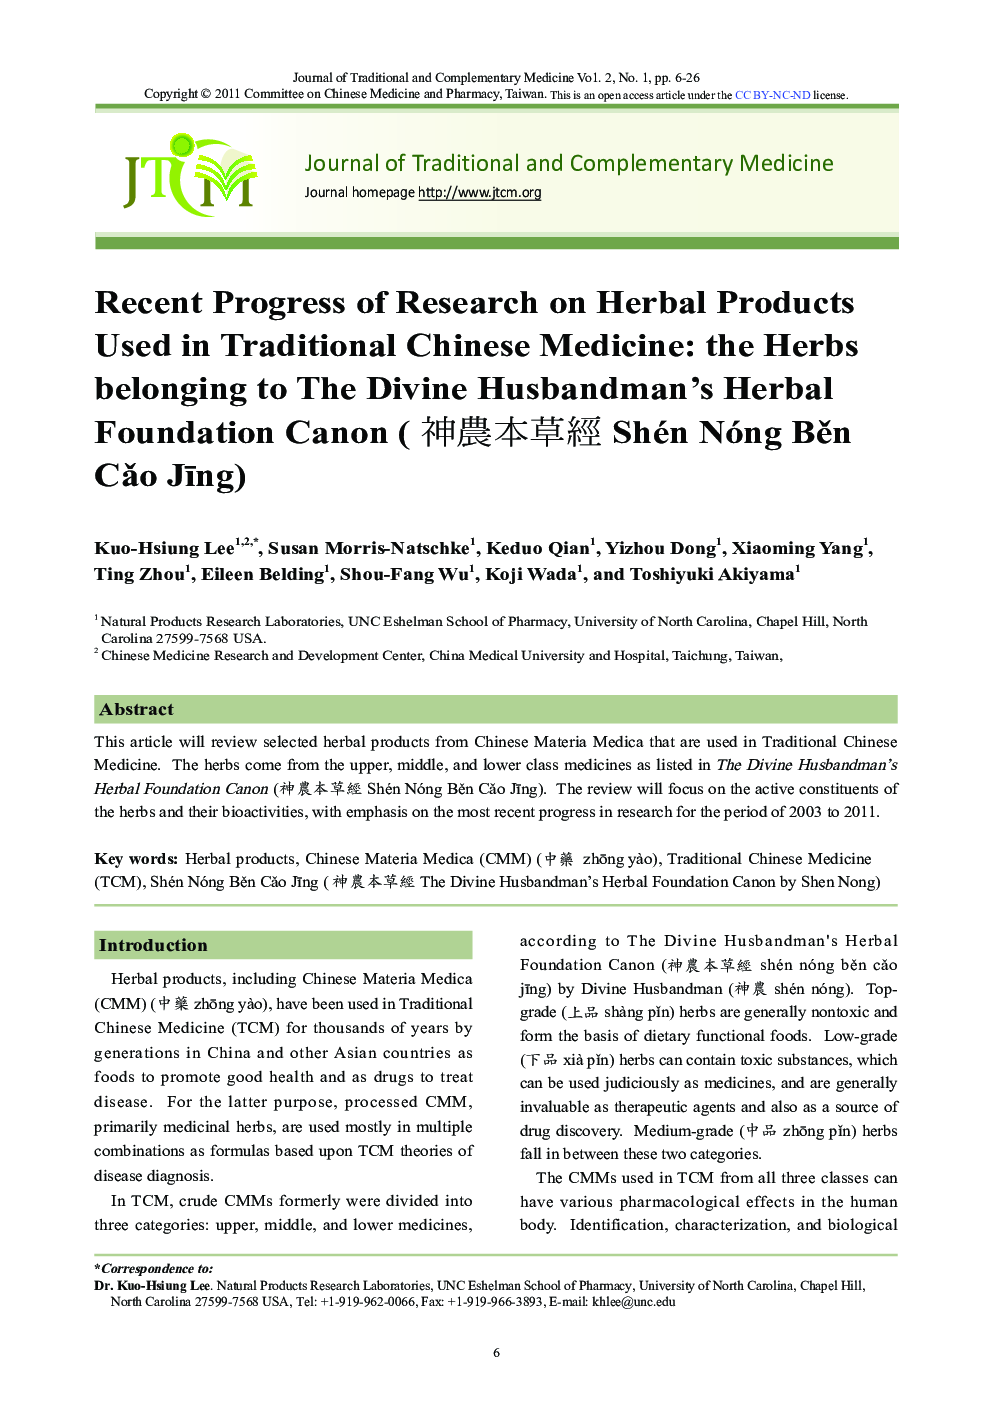 Recent Progress of Research on Herbal Products Used in Traditional Chinese Medicine: the Herbs belonging to The Divine Husbandman's Herbal Foundation Canon (神農本草經 Shén Nóng Běn Cǎo Jīng)